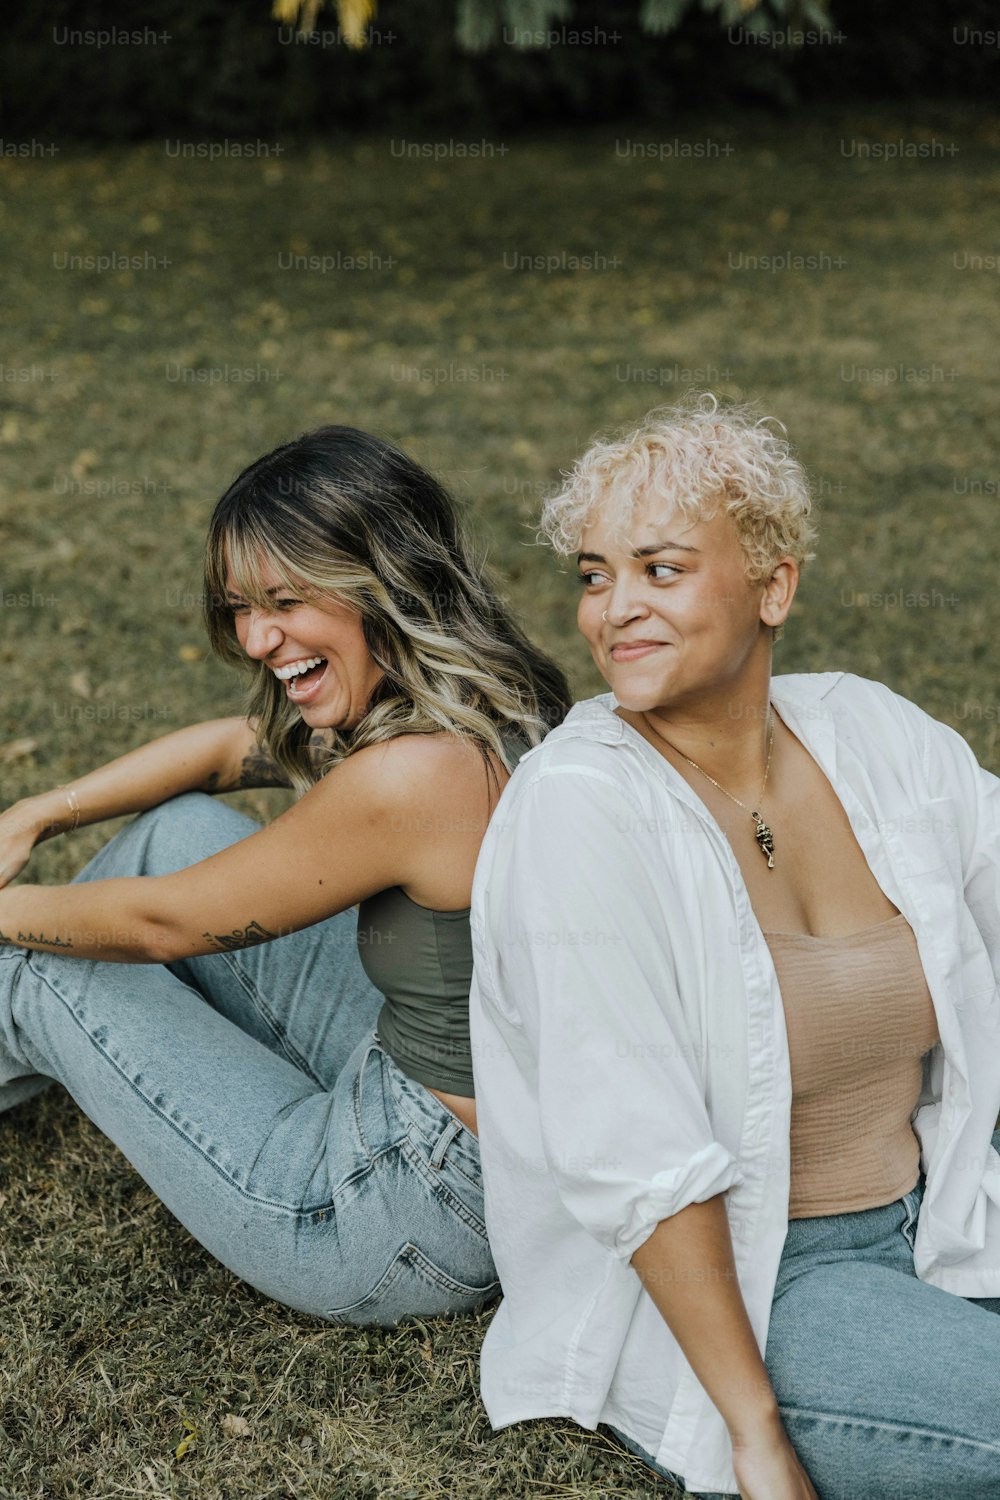 a couple of women sitting on top of a grass covered field